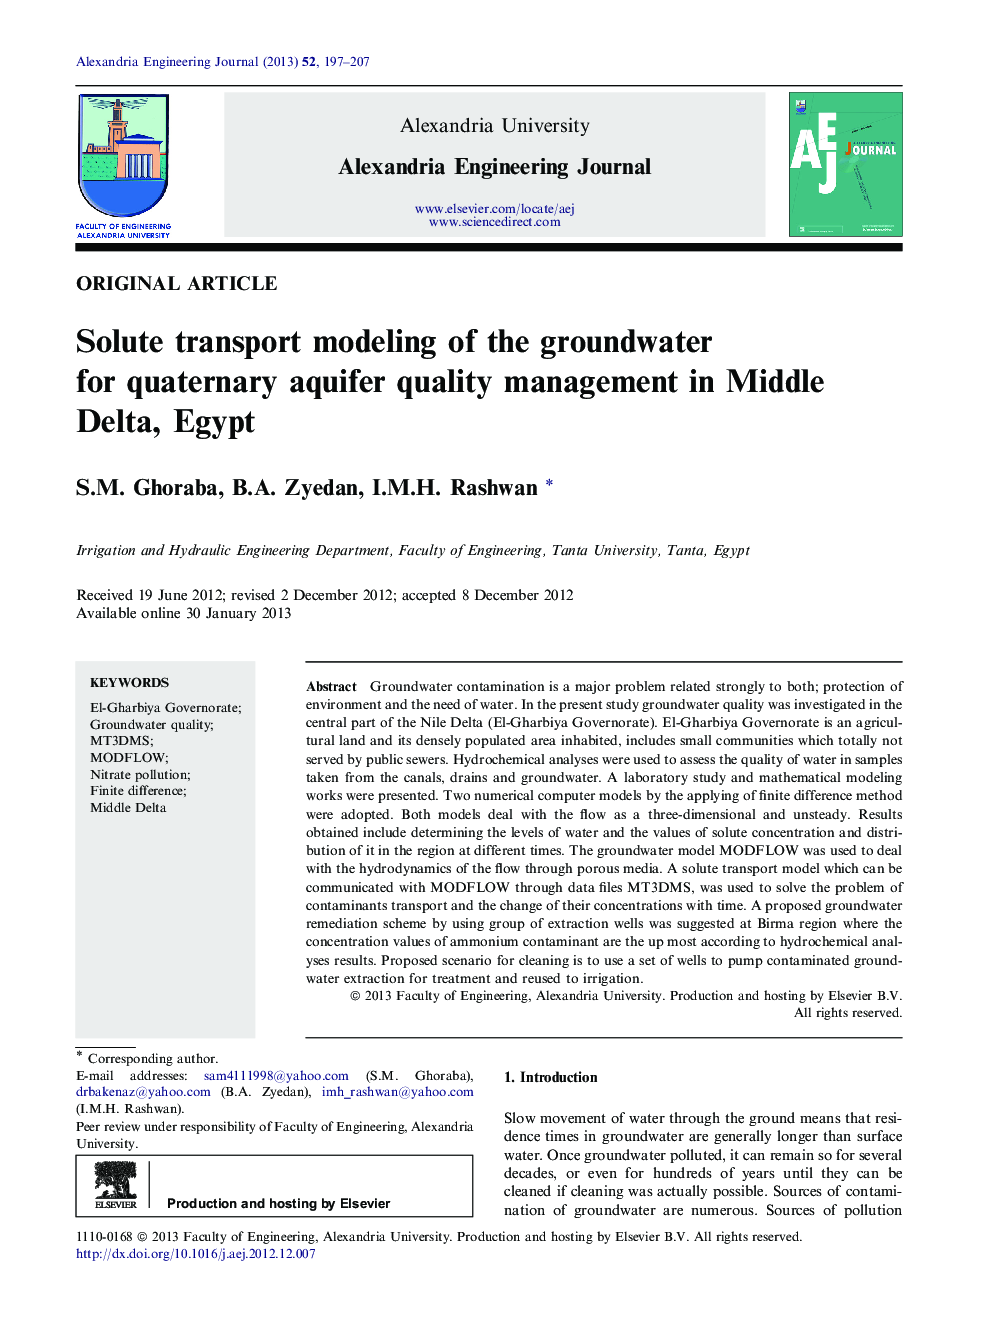 Solute transport modeling of the groundwater for quaternary aquifer quality management in Middle Delta, Egypt